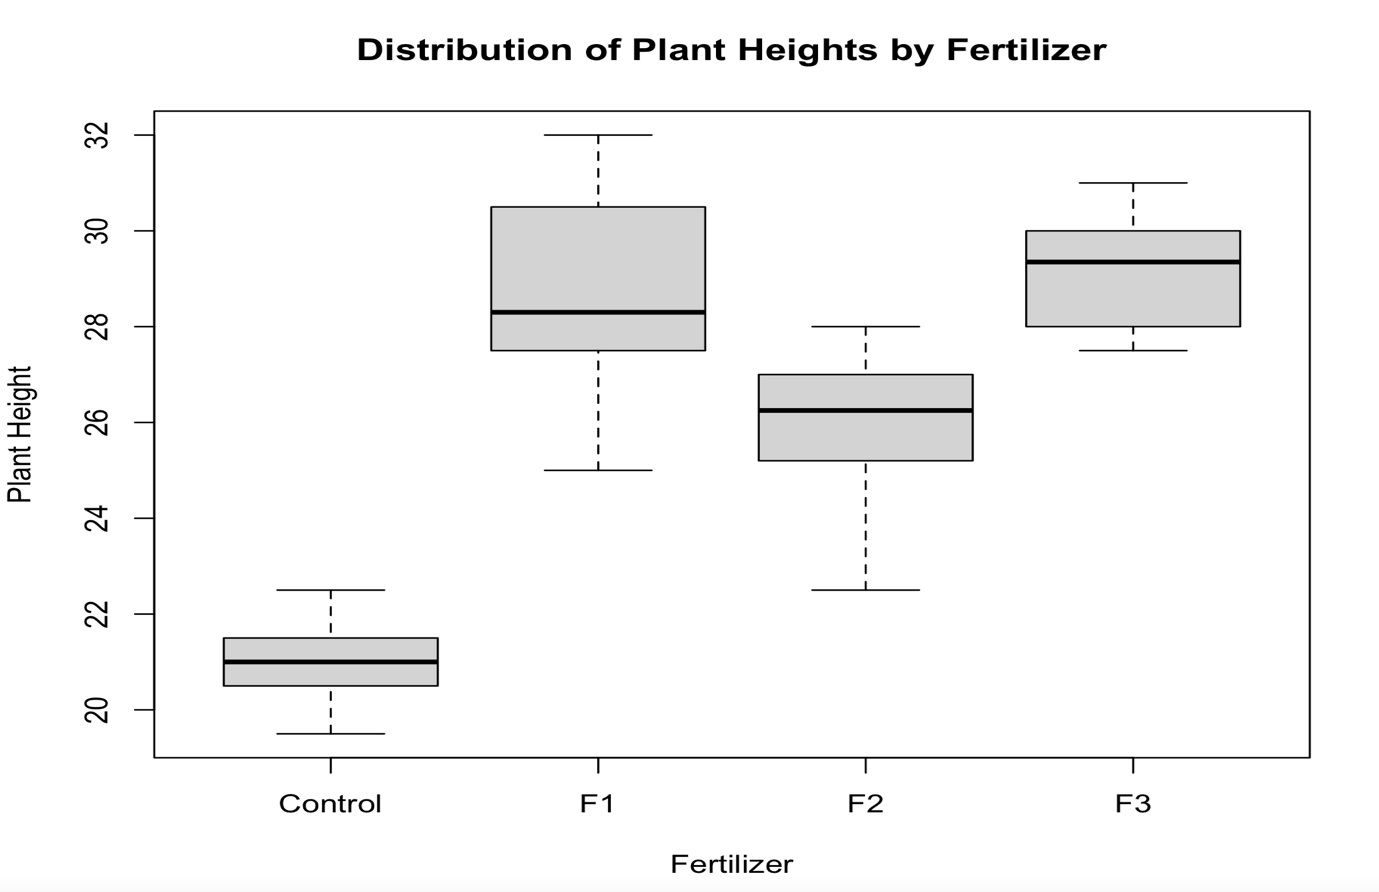 R-generated boxplot for distribution of plant heights by fertilizer.